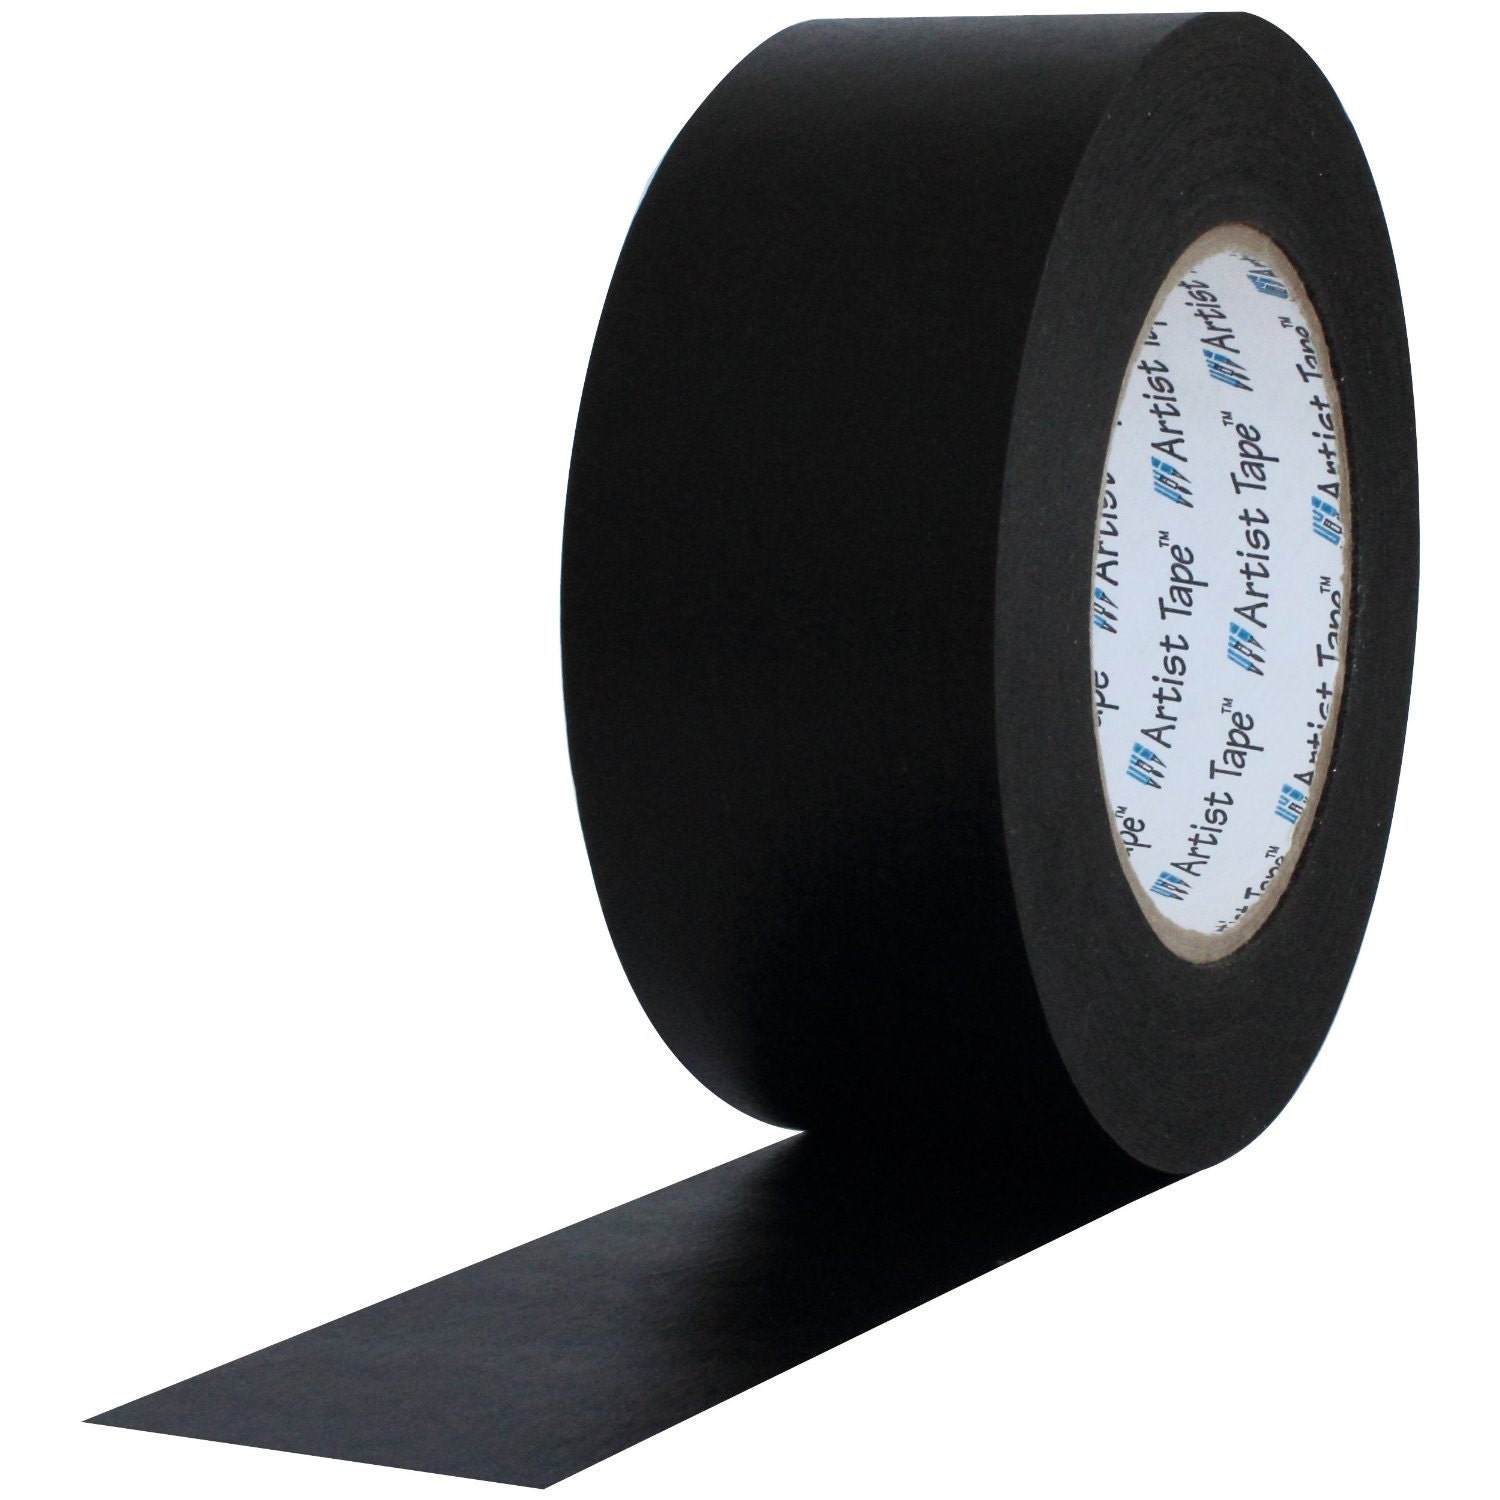 Pro Art 12inch by 60yards White Artist Tape for sale online